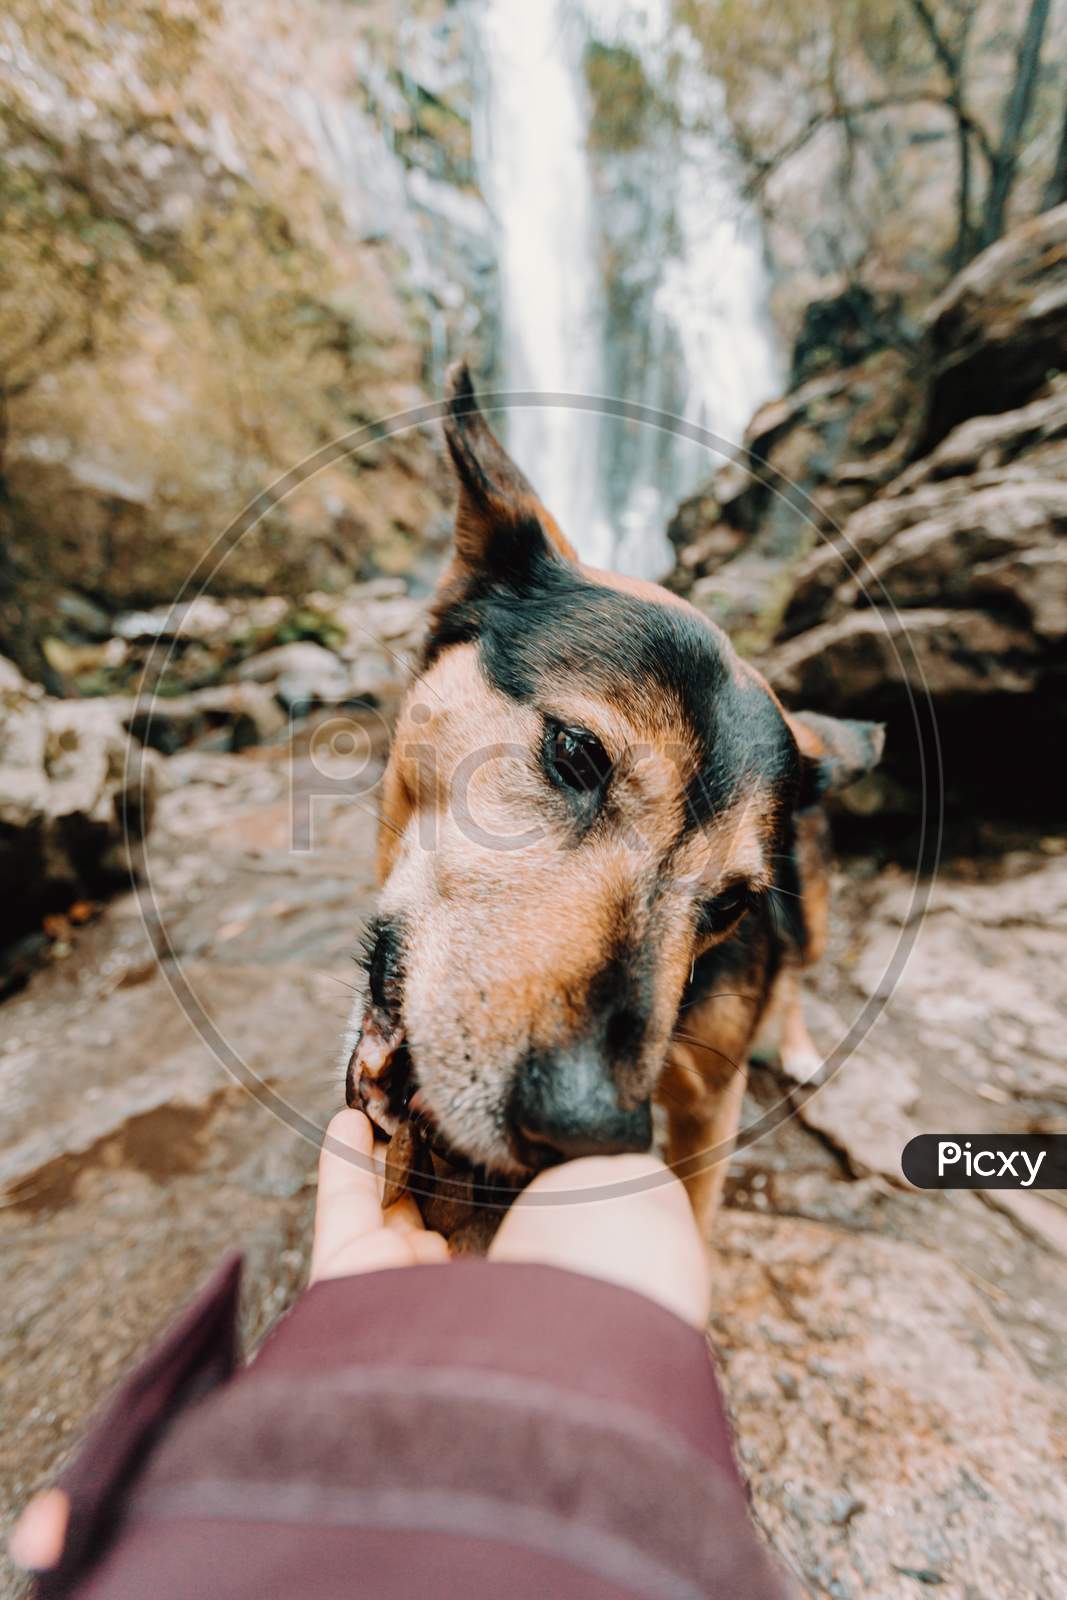 Dog Eating From Hand With A Waterfall As A Background